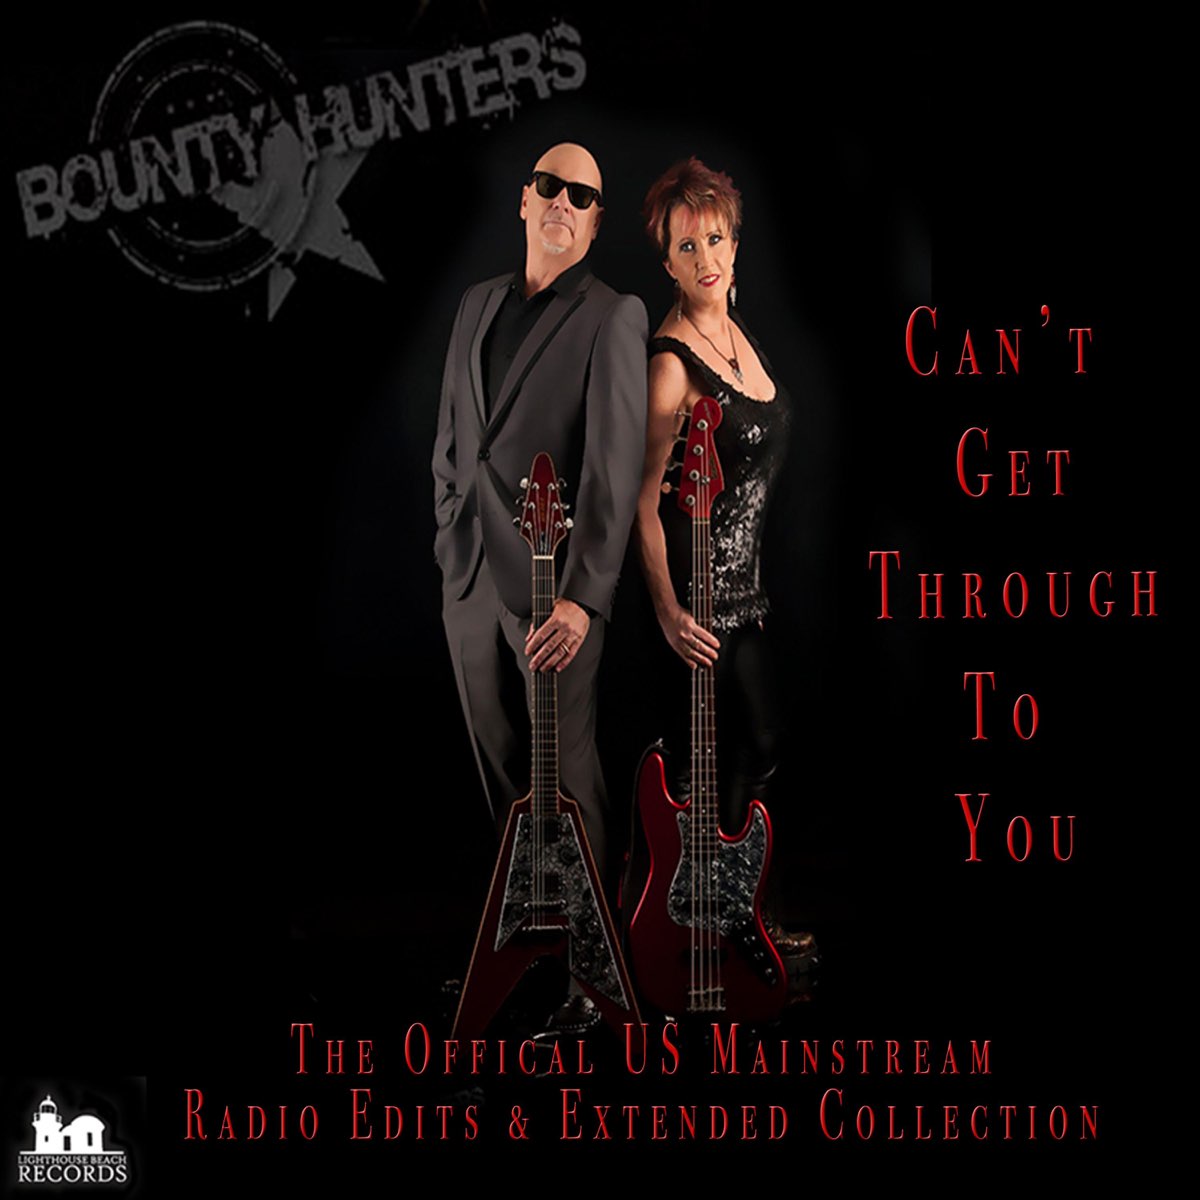 regional Hubert Hudson Sociedad Can't Get Through to You (The Official U S Mainstream Radio Edits &  Extended Mix Collection) - EP de Bounty Hunters en Apple Music